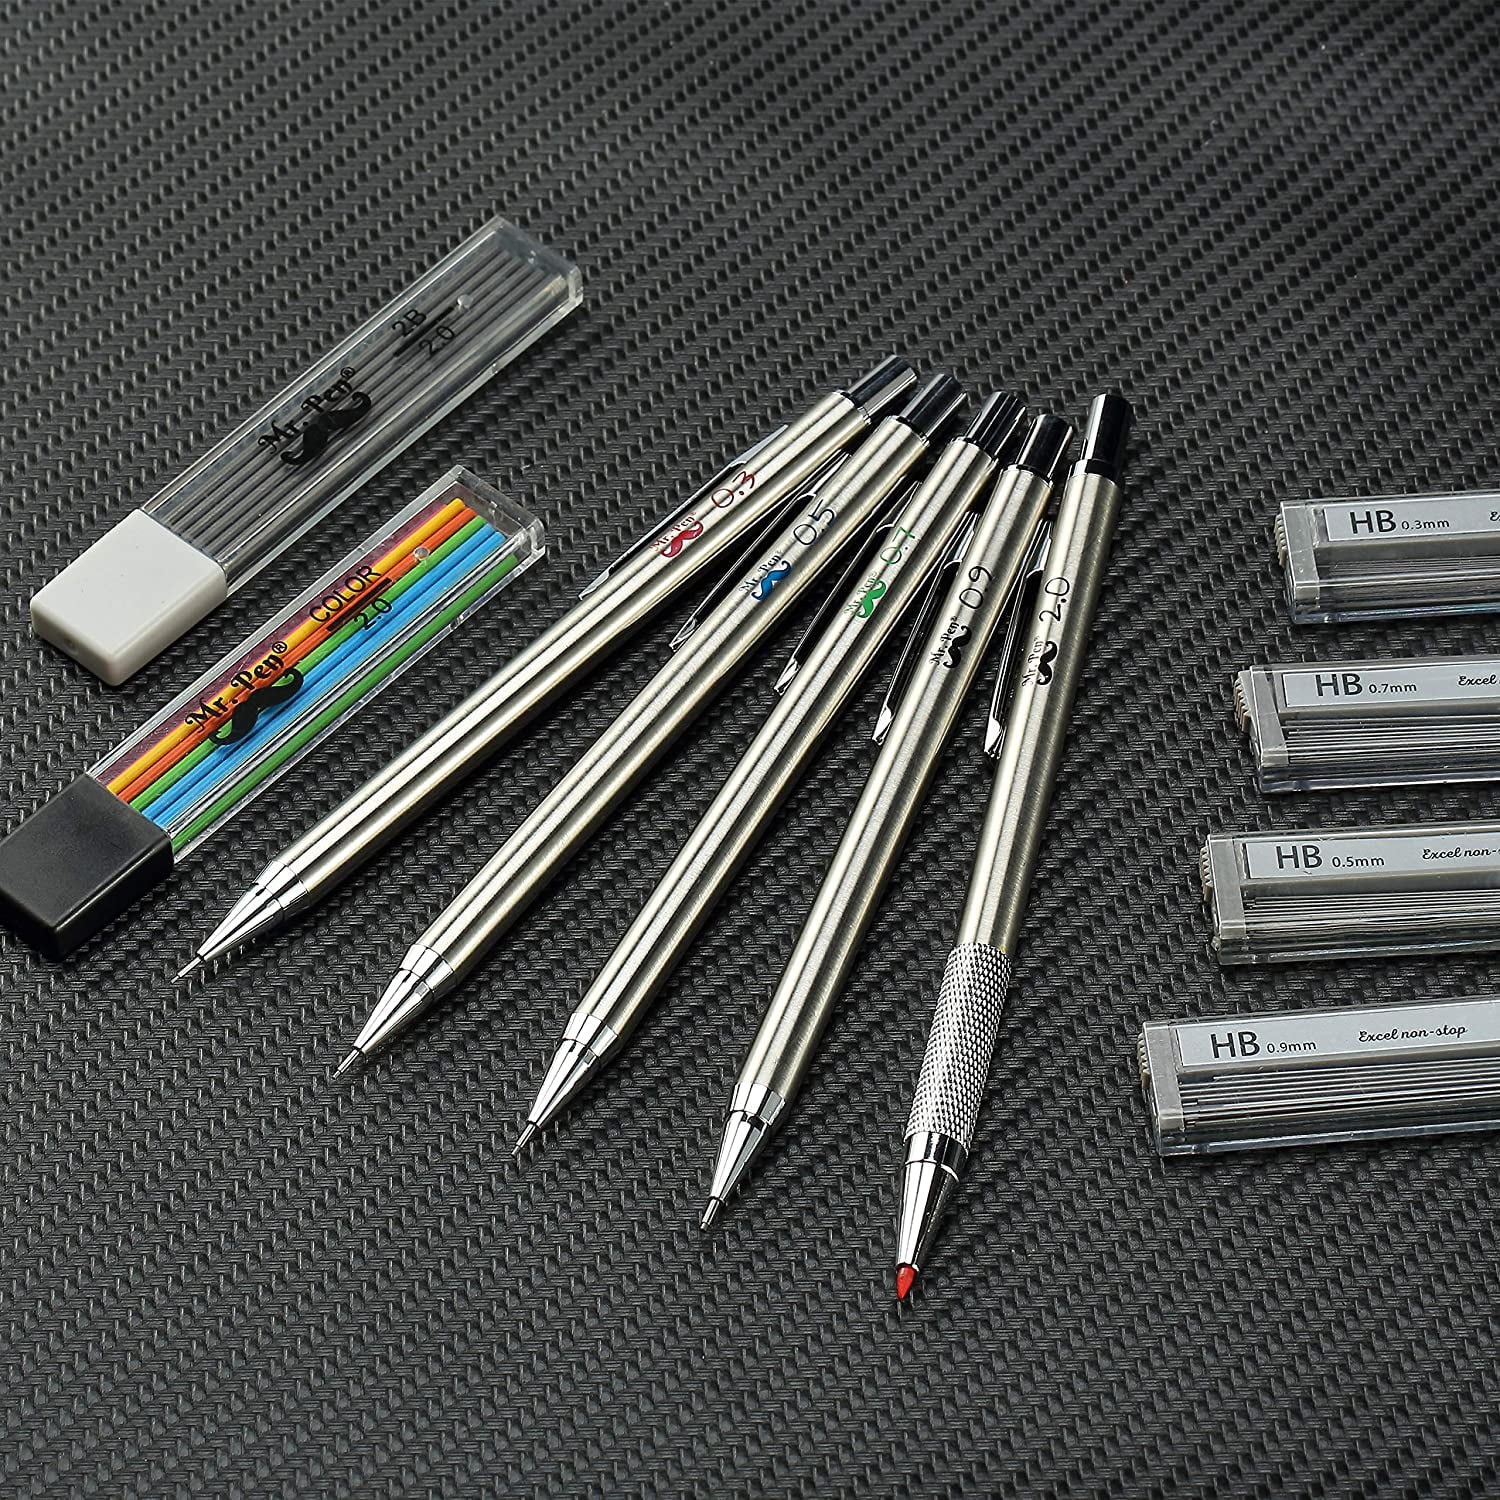 2mm Drawing Mechanical Pencils 0.5 Architecture 0.7 Drafting Metal Mechanical Pencils 5 Sizes Mr 0.9 Pen- Metal Mechanical Pencil Set with Lead and Eraser Refills 0.3 Sketching 